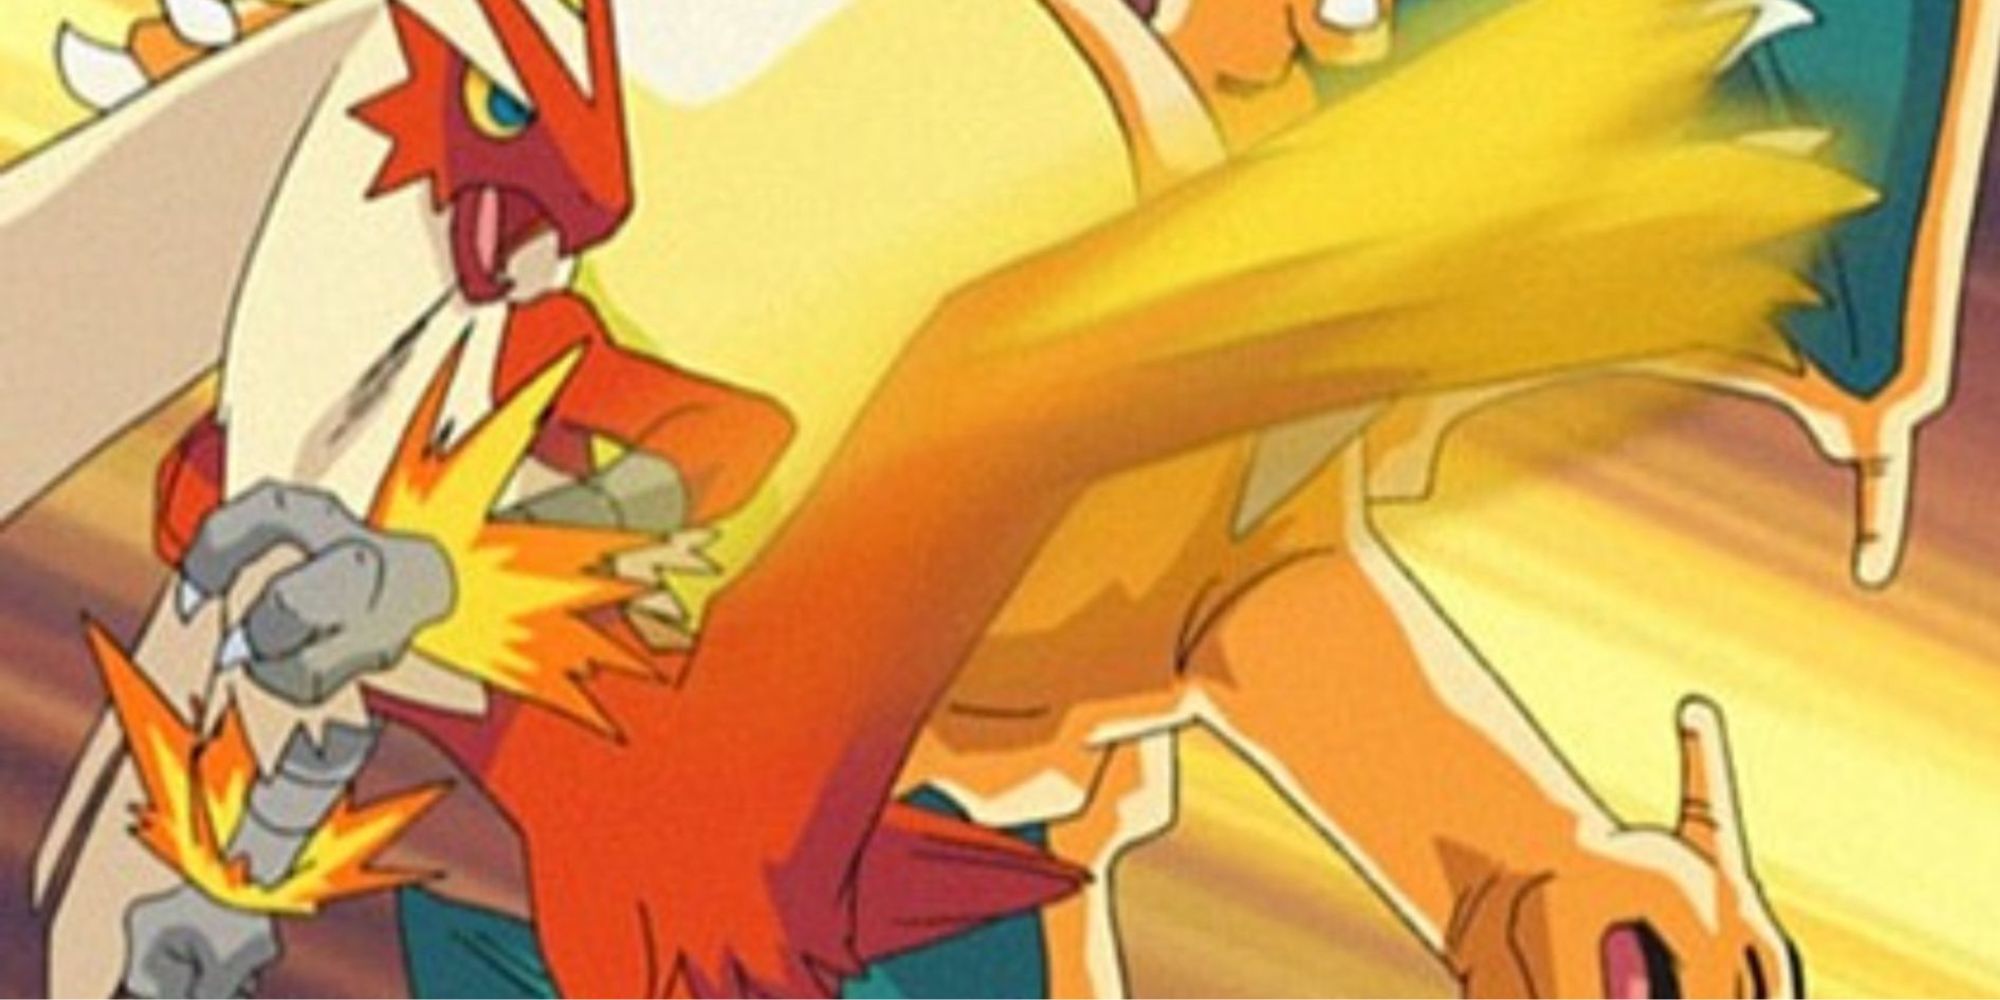 Blaziken knocks a Charizard out with a high-kick